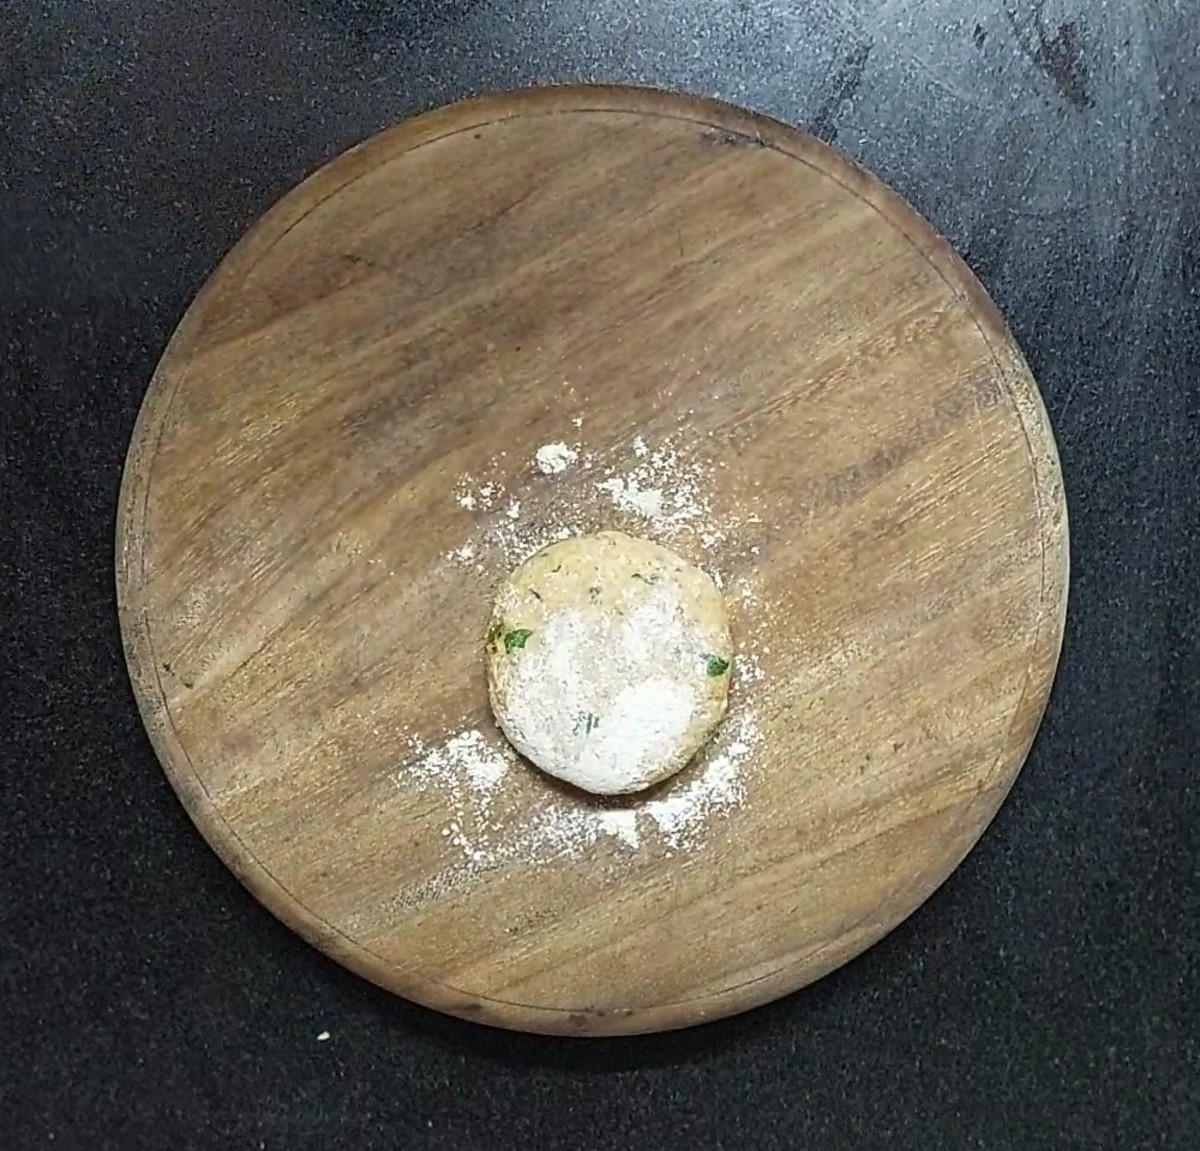 Take a ball of dough on a rolling board and dust with wheat flour.